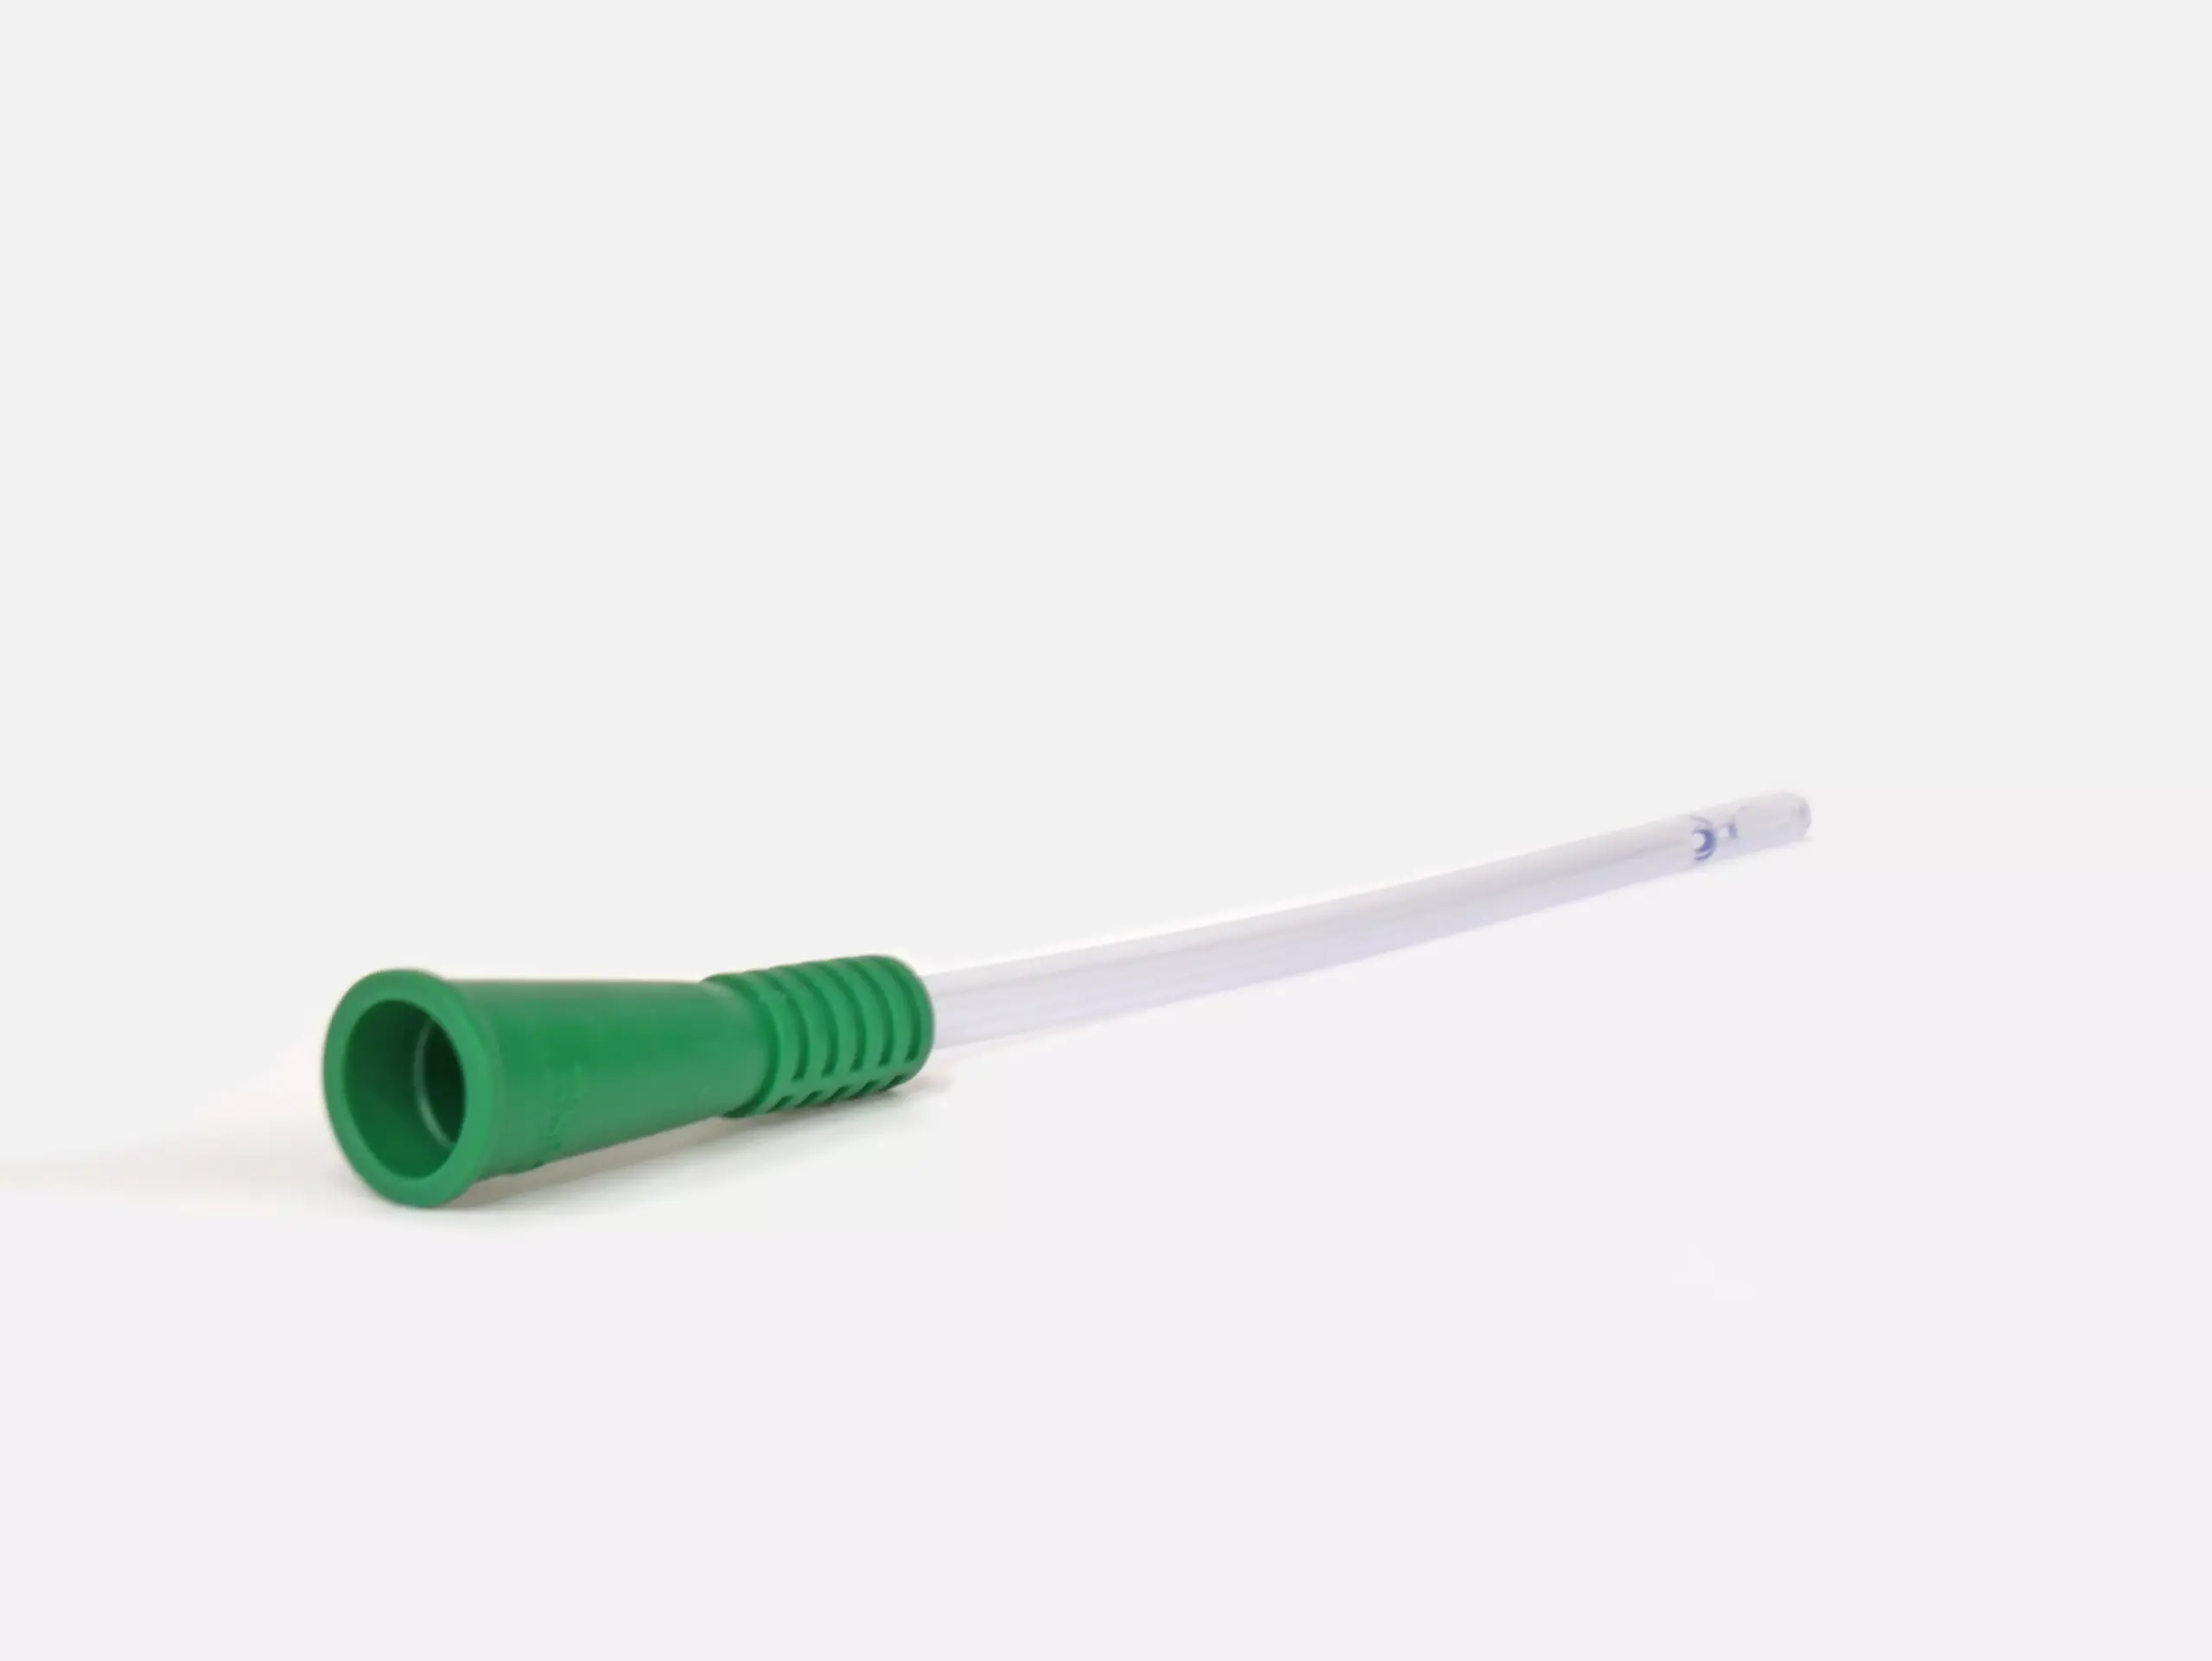 An up-close product photograph featuring a catheter by RA Fischer Co., specializing in urological care and sourced from the Cure brand. The central focus of the image is the vibrant green gripper sleeve.